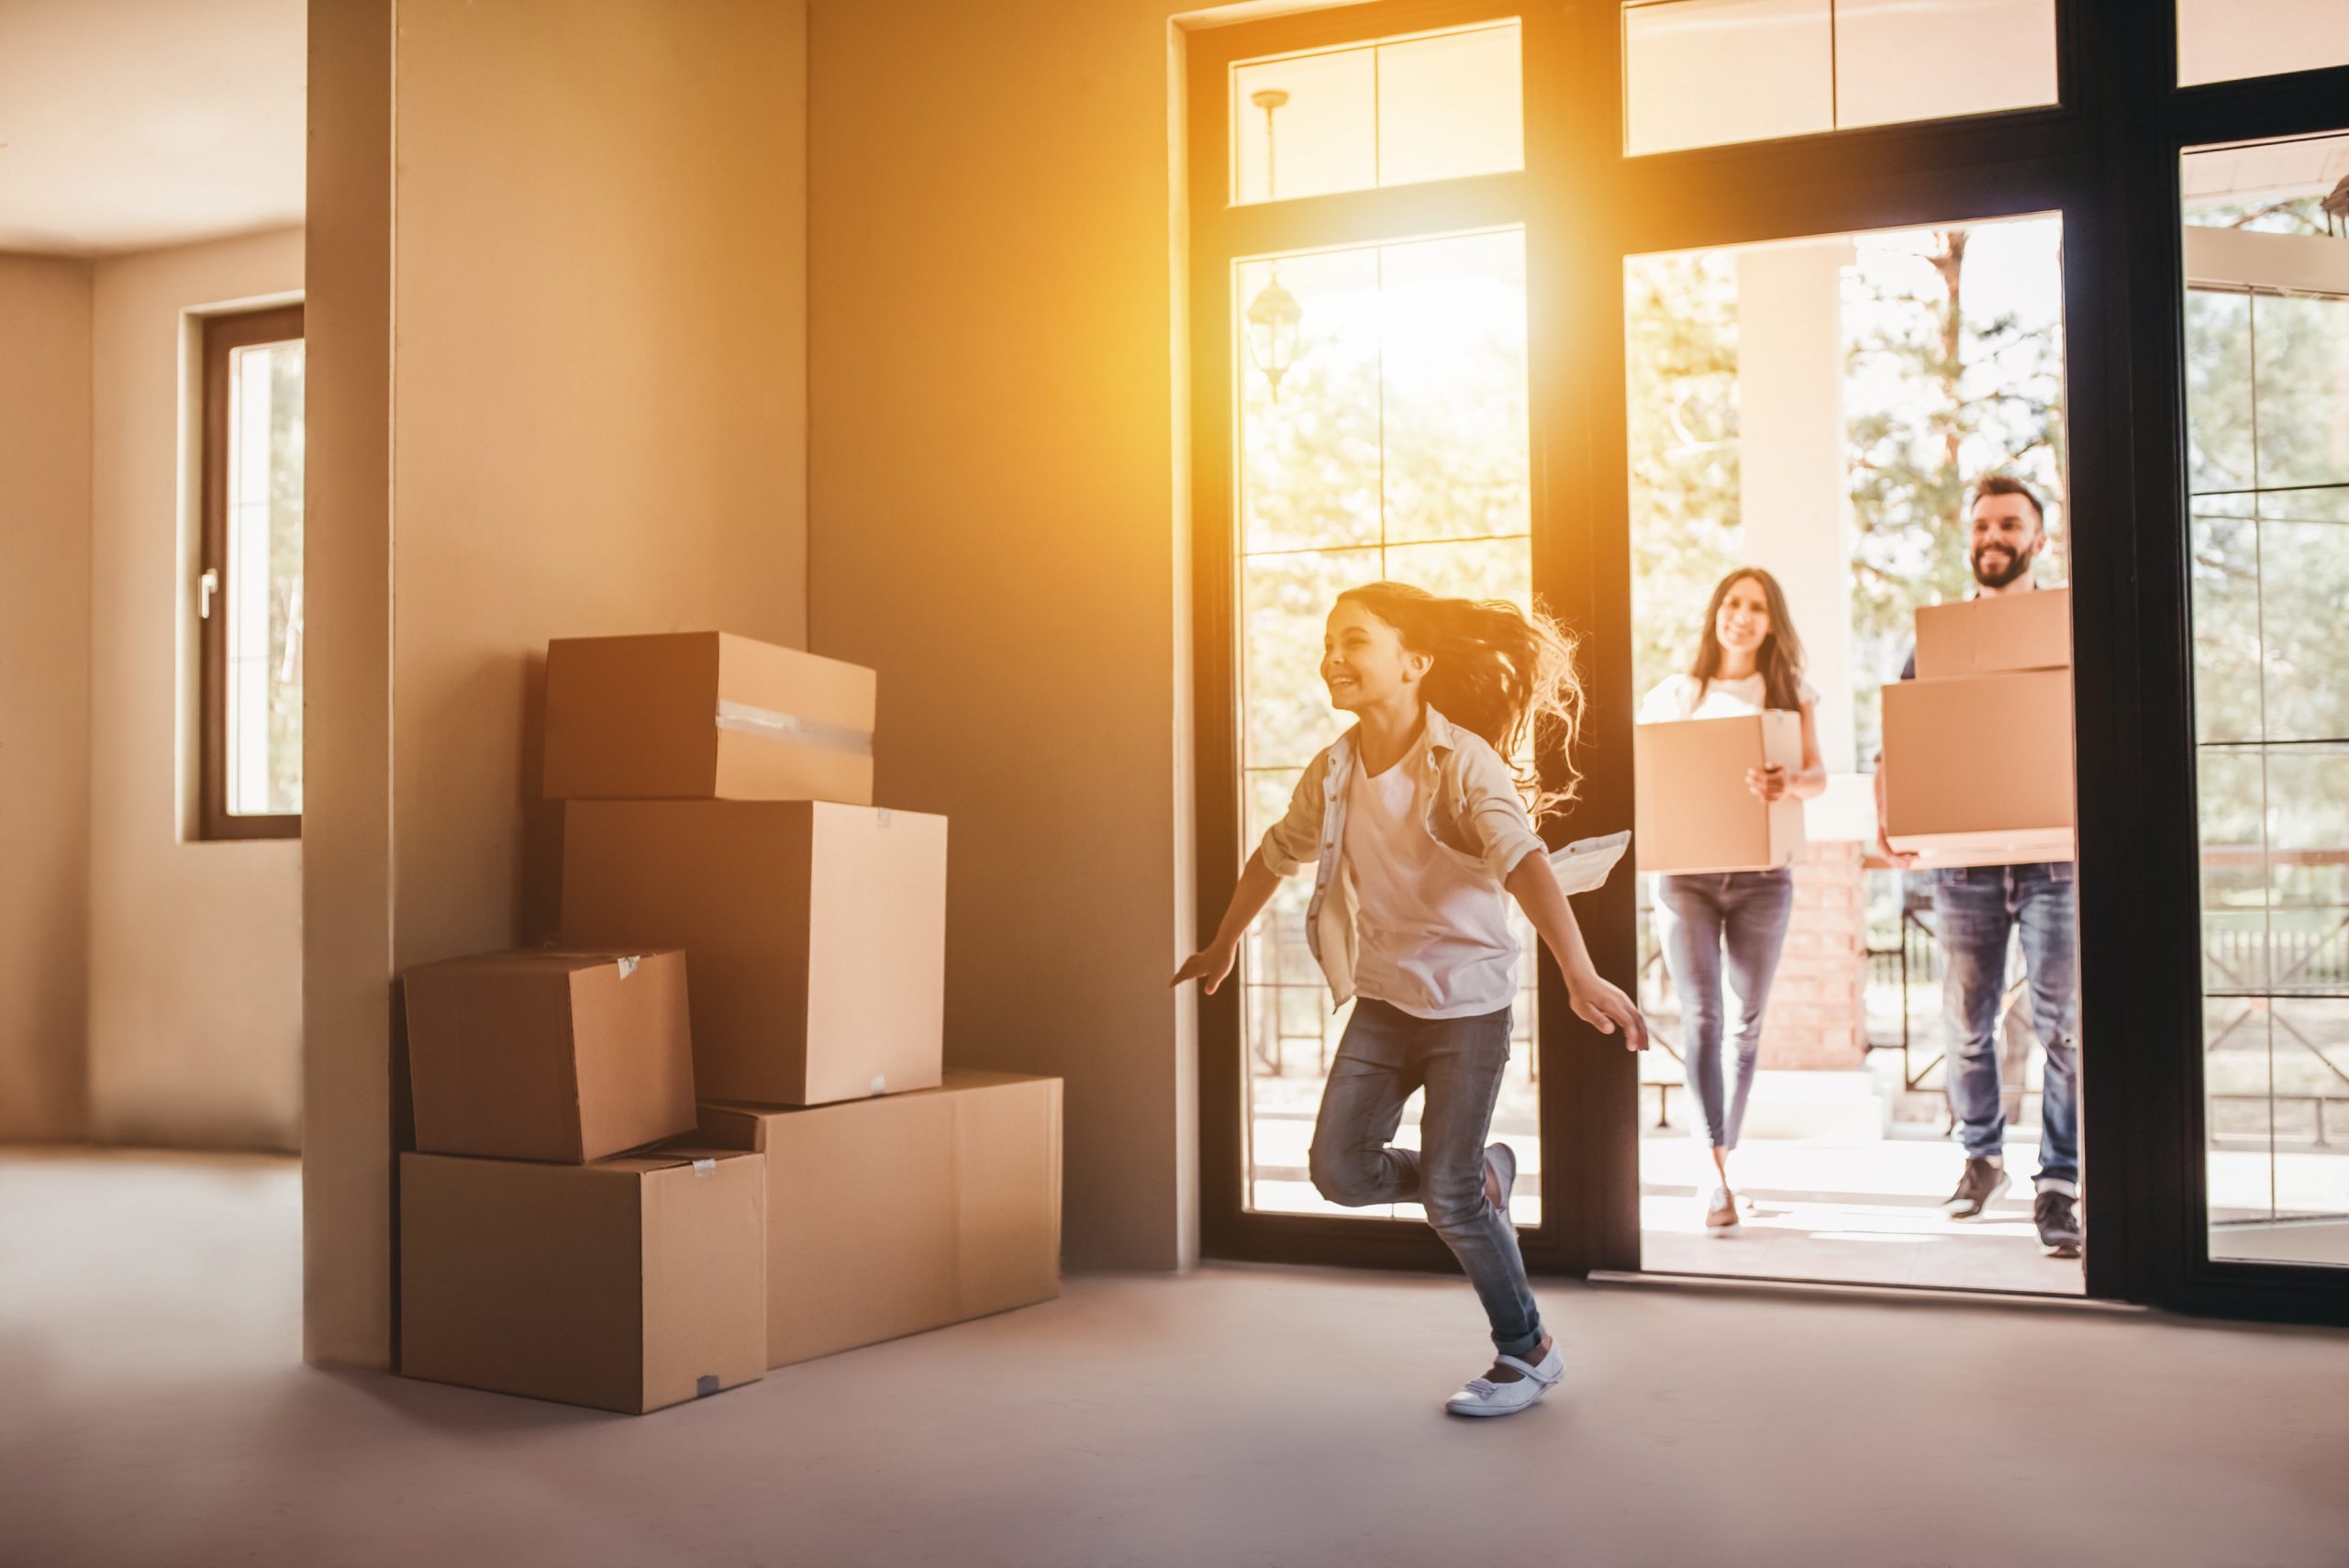 Home Moving | How to Move Without Stress